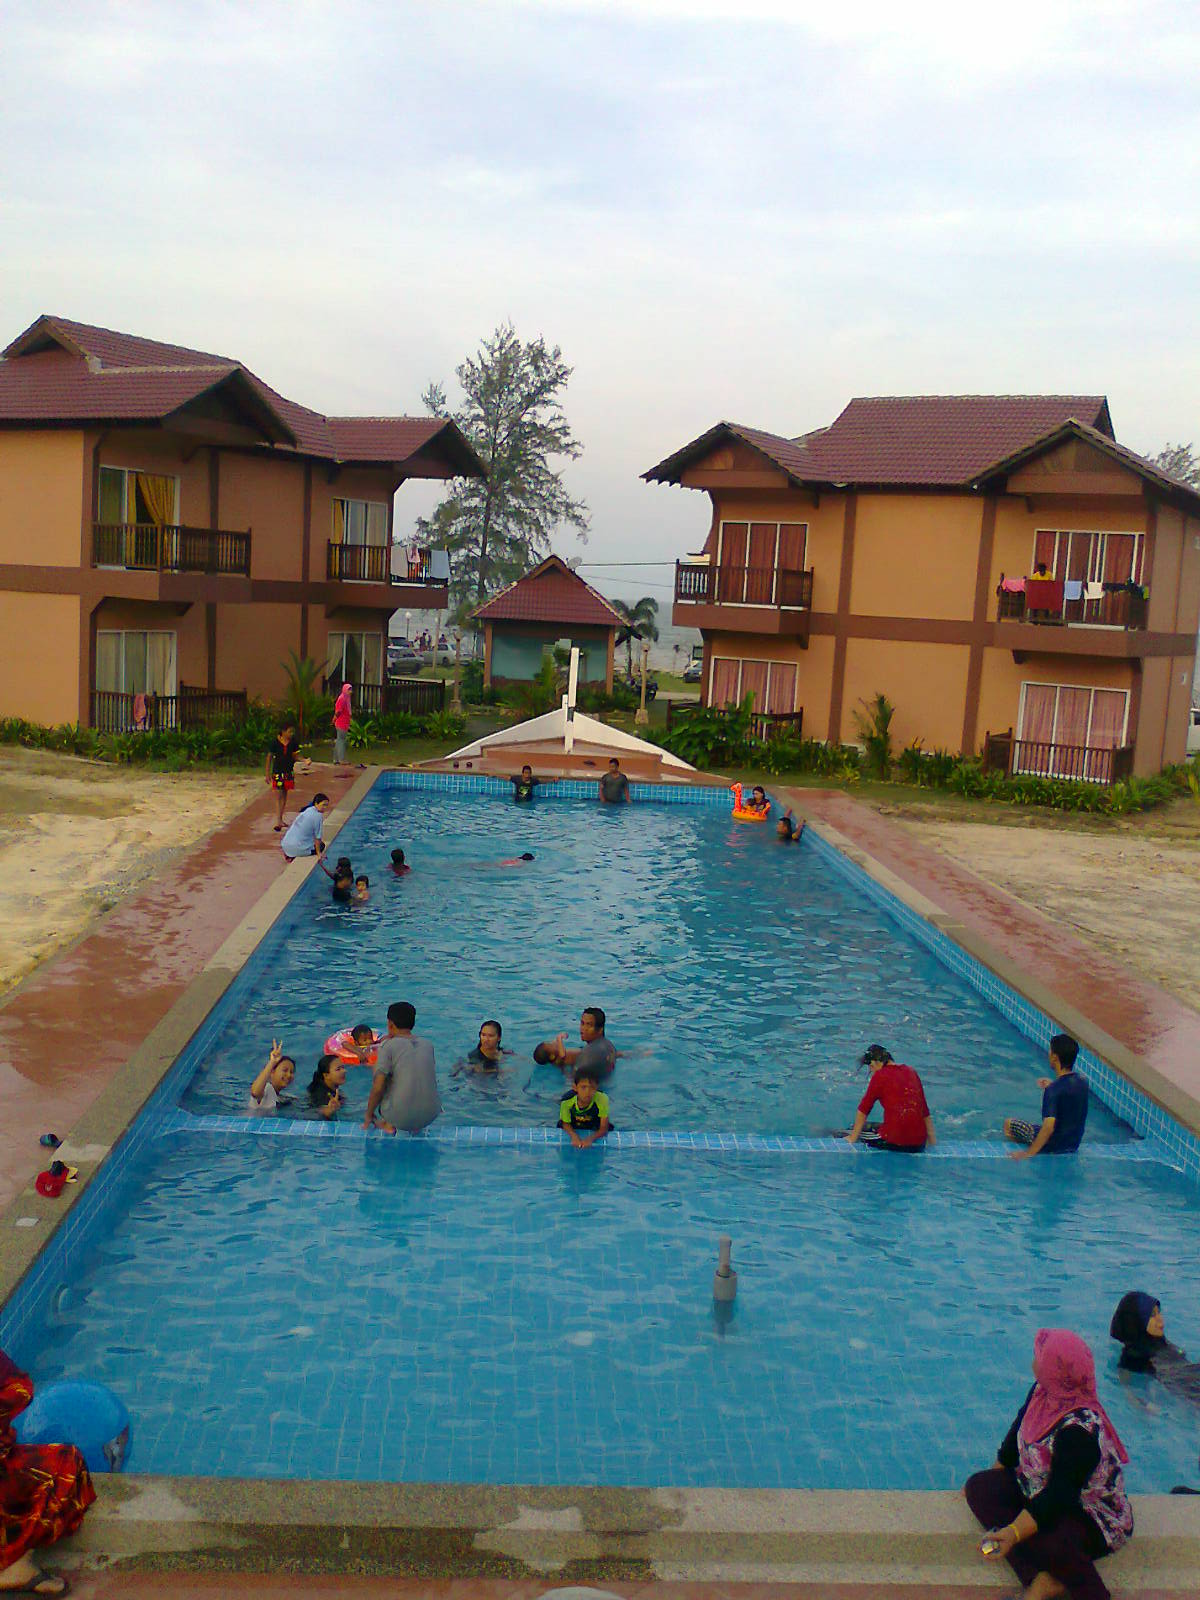 Posted by Mersing Beach Resort 5comments